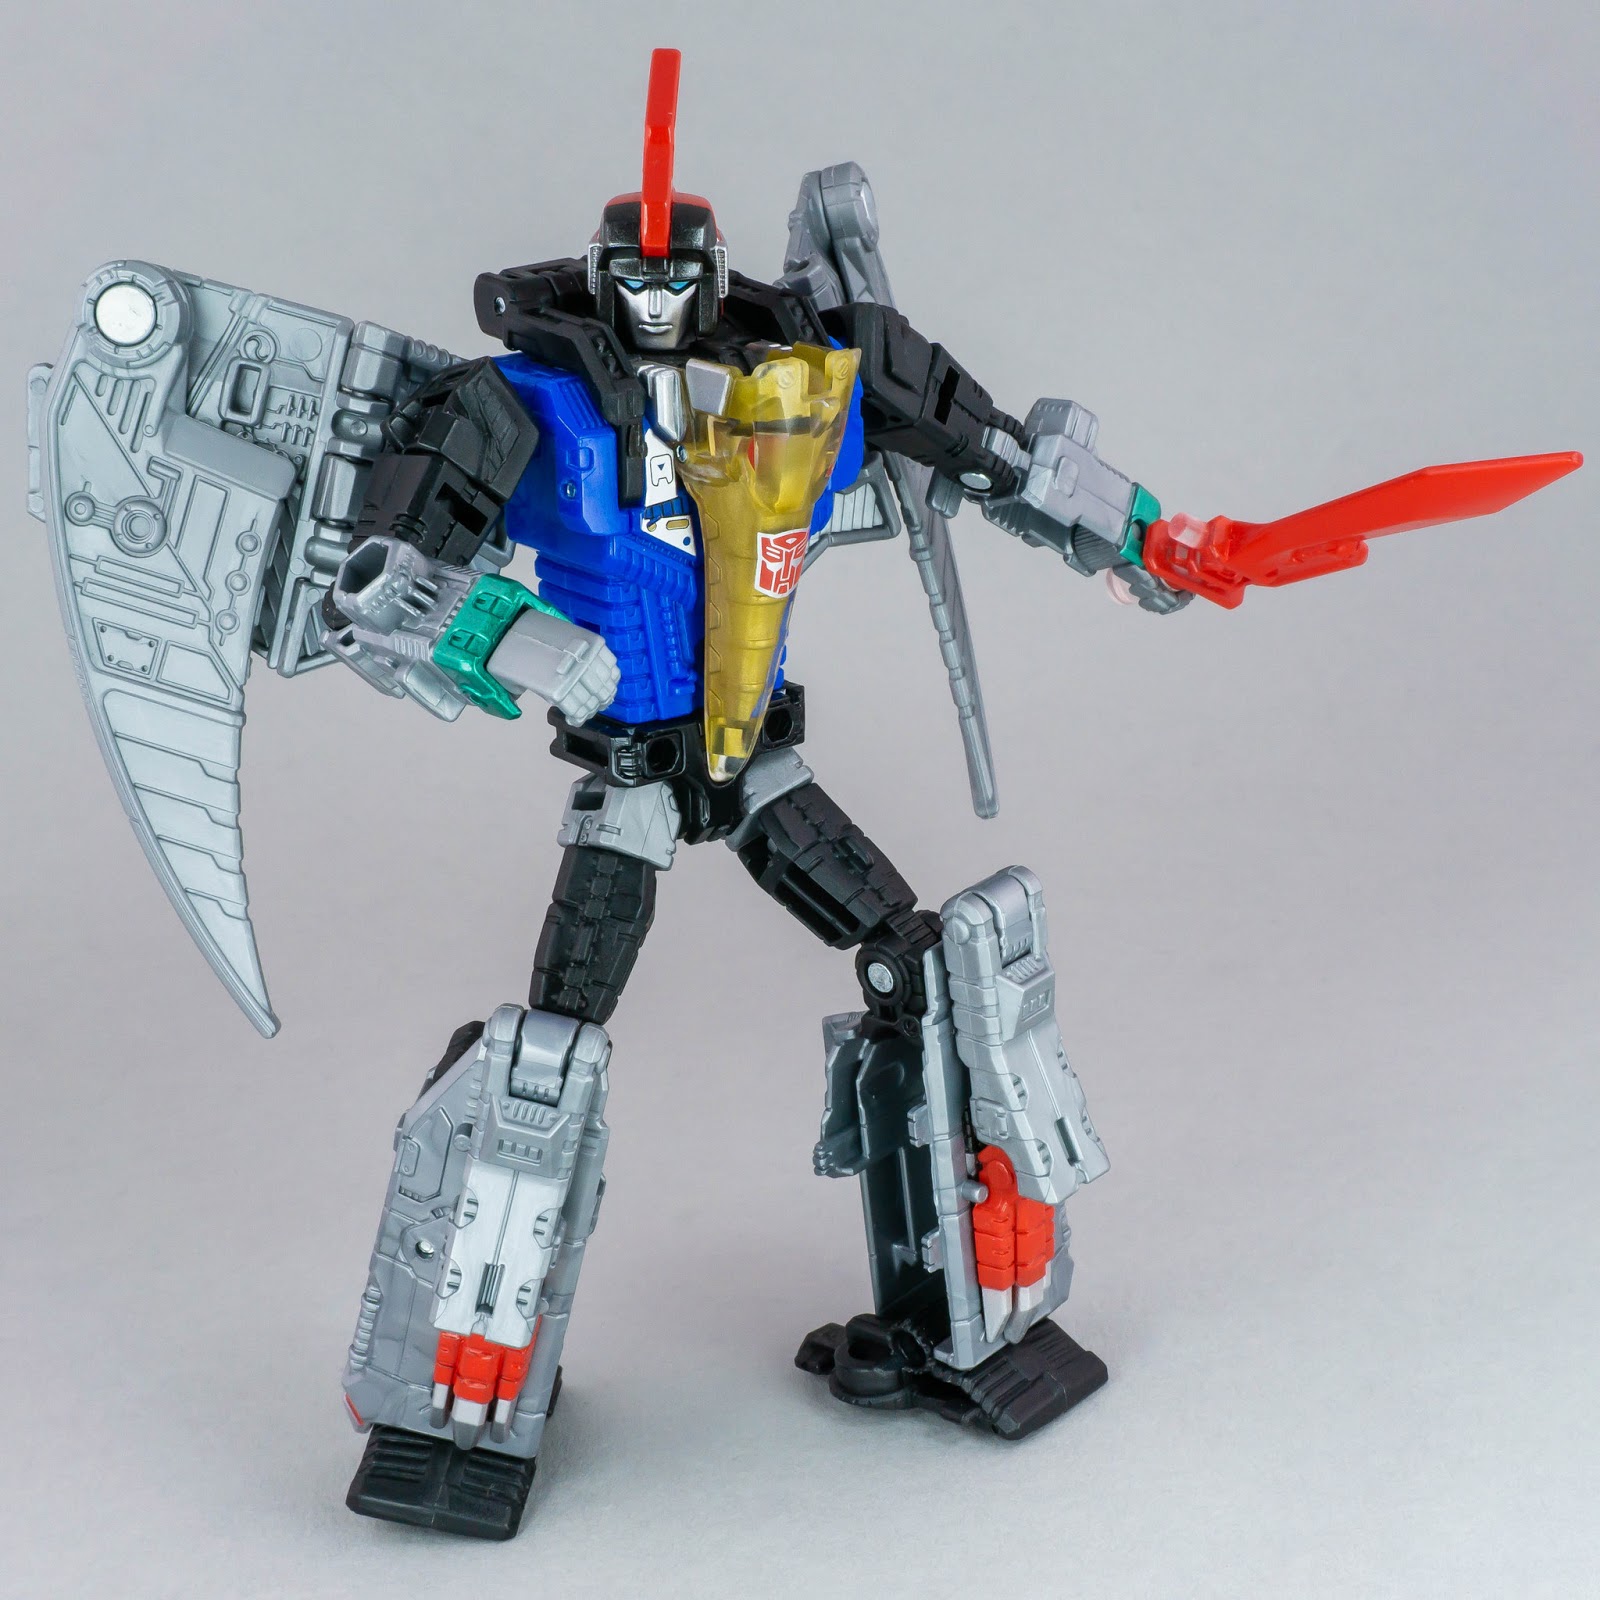 Transformers Power of the Primes Swoop robot mode posed